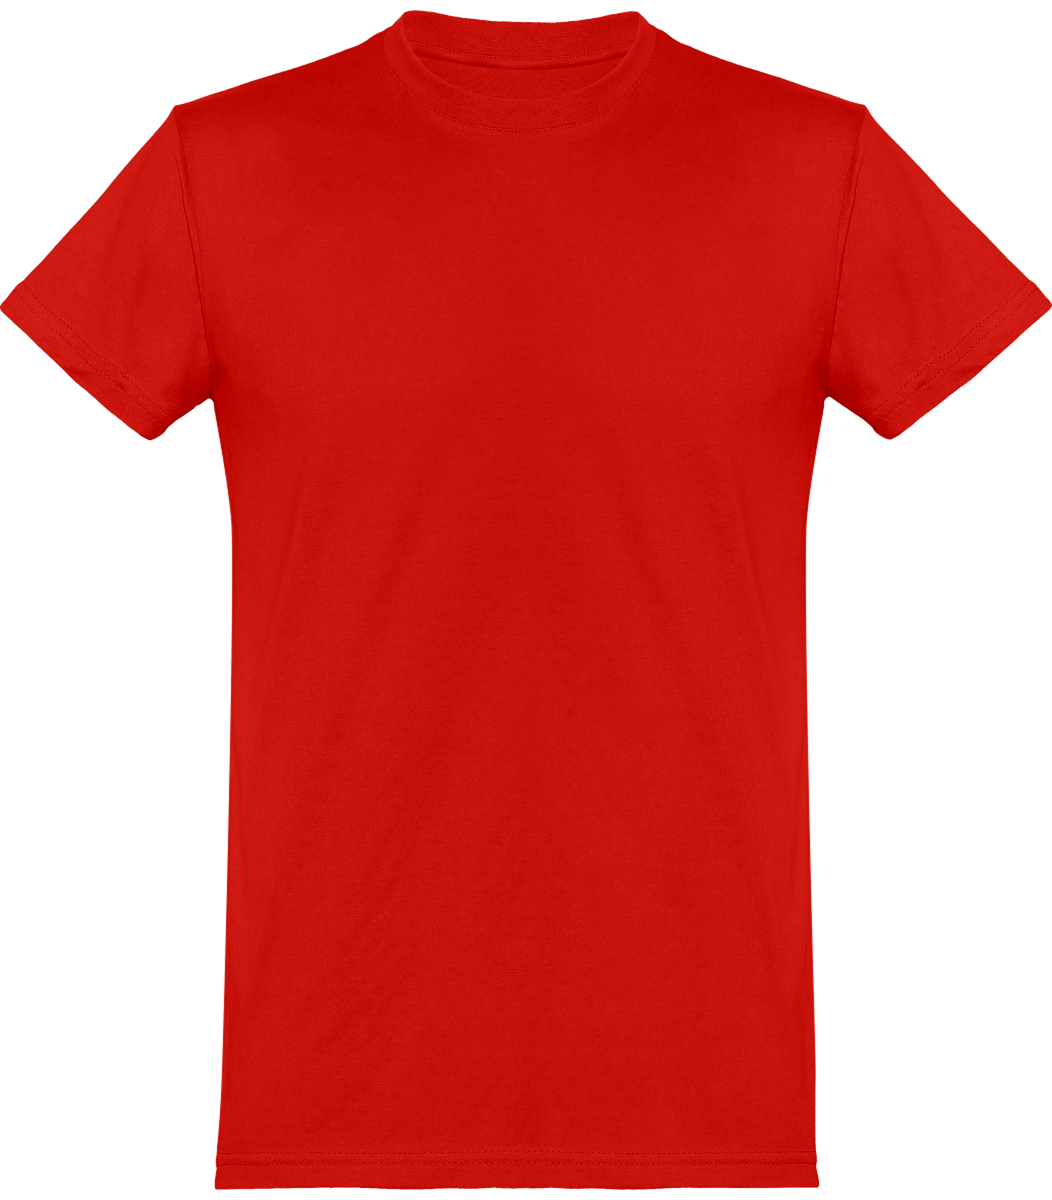 Men's Basic Cut 100% Cotton Tee To Customize Red